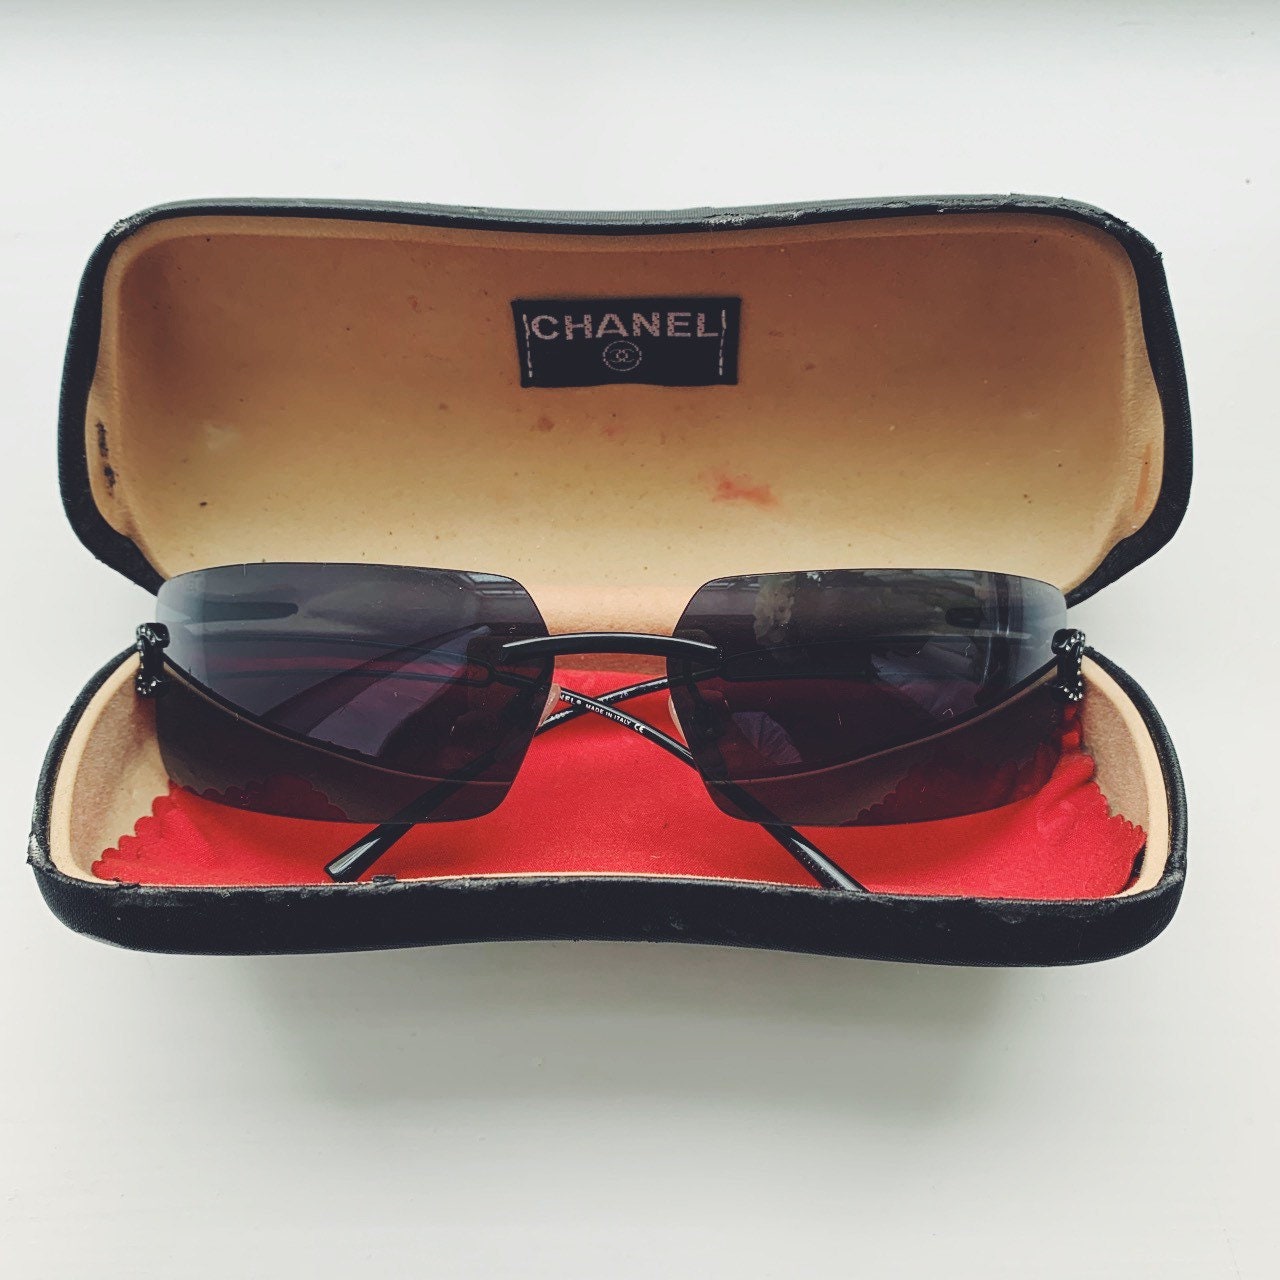 How To Authenticate Vintage Chanel Sunglasses